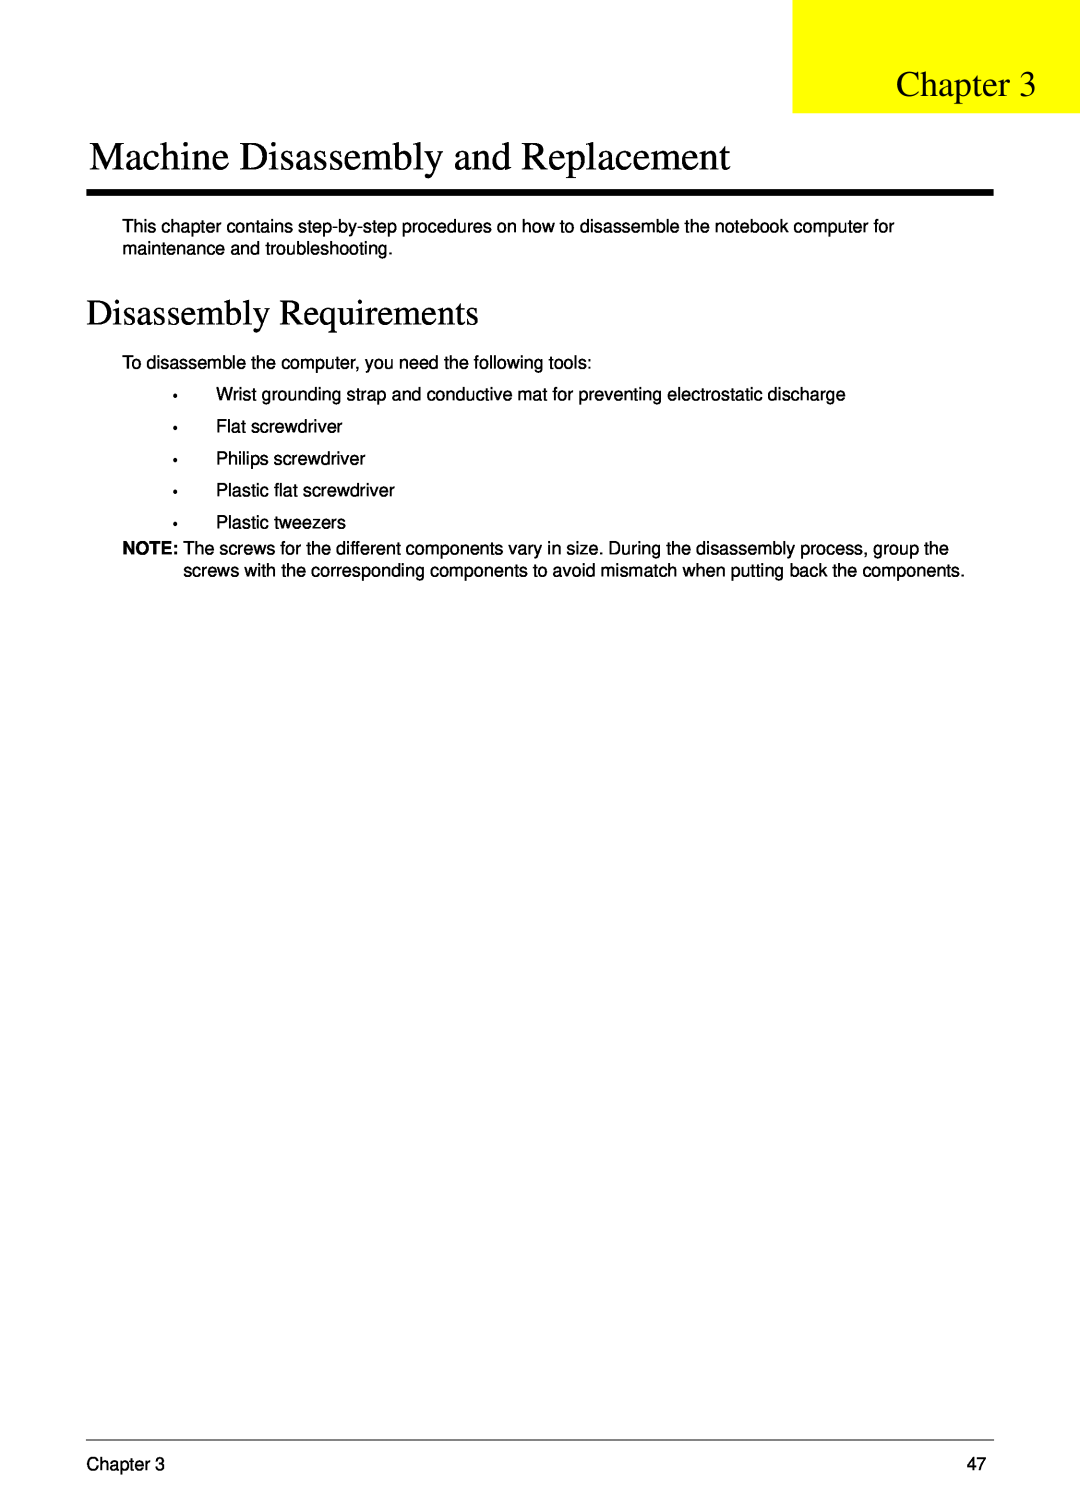 Acer 5530G manual Machine Disassembly and Replacement, Disassembly Requirements, Chapter 